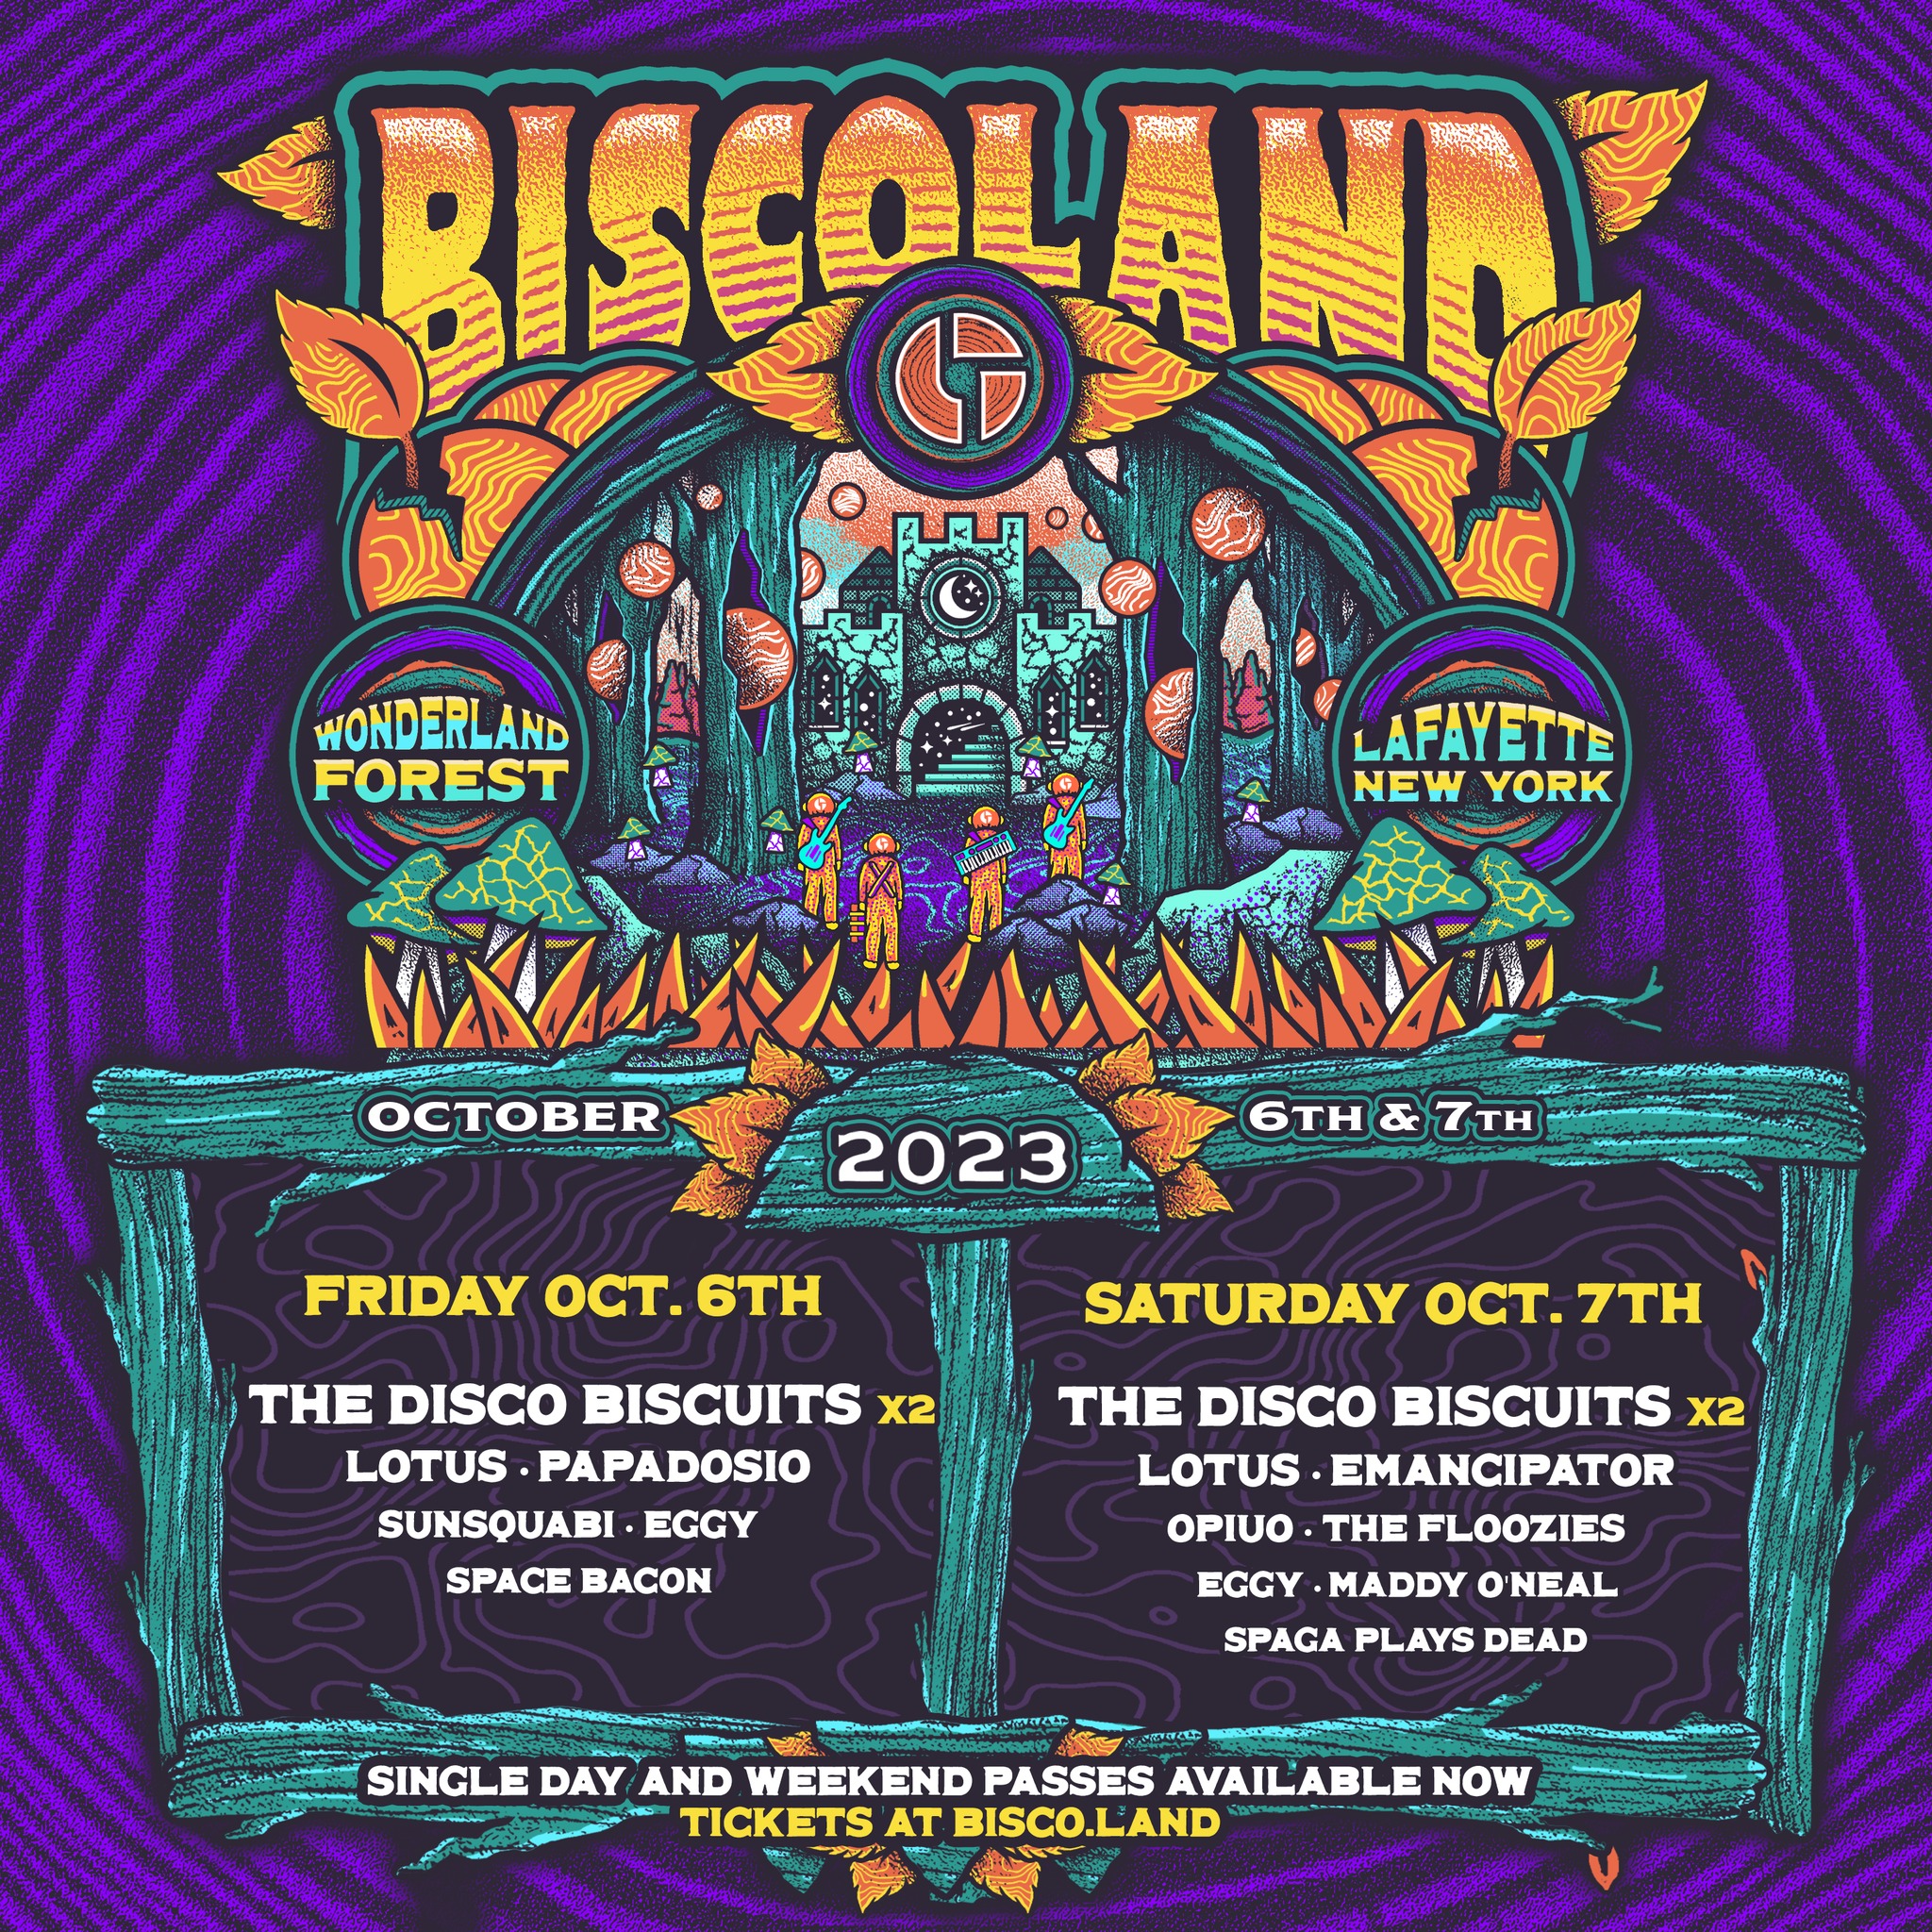 BISCOLAND 2023 Lineup poster image